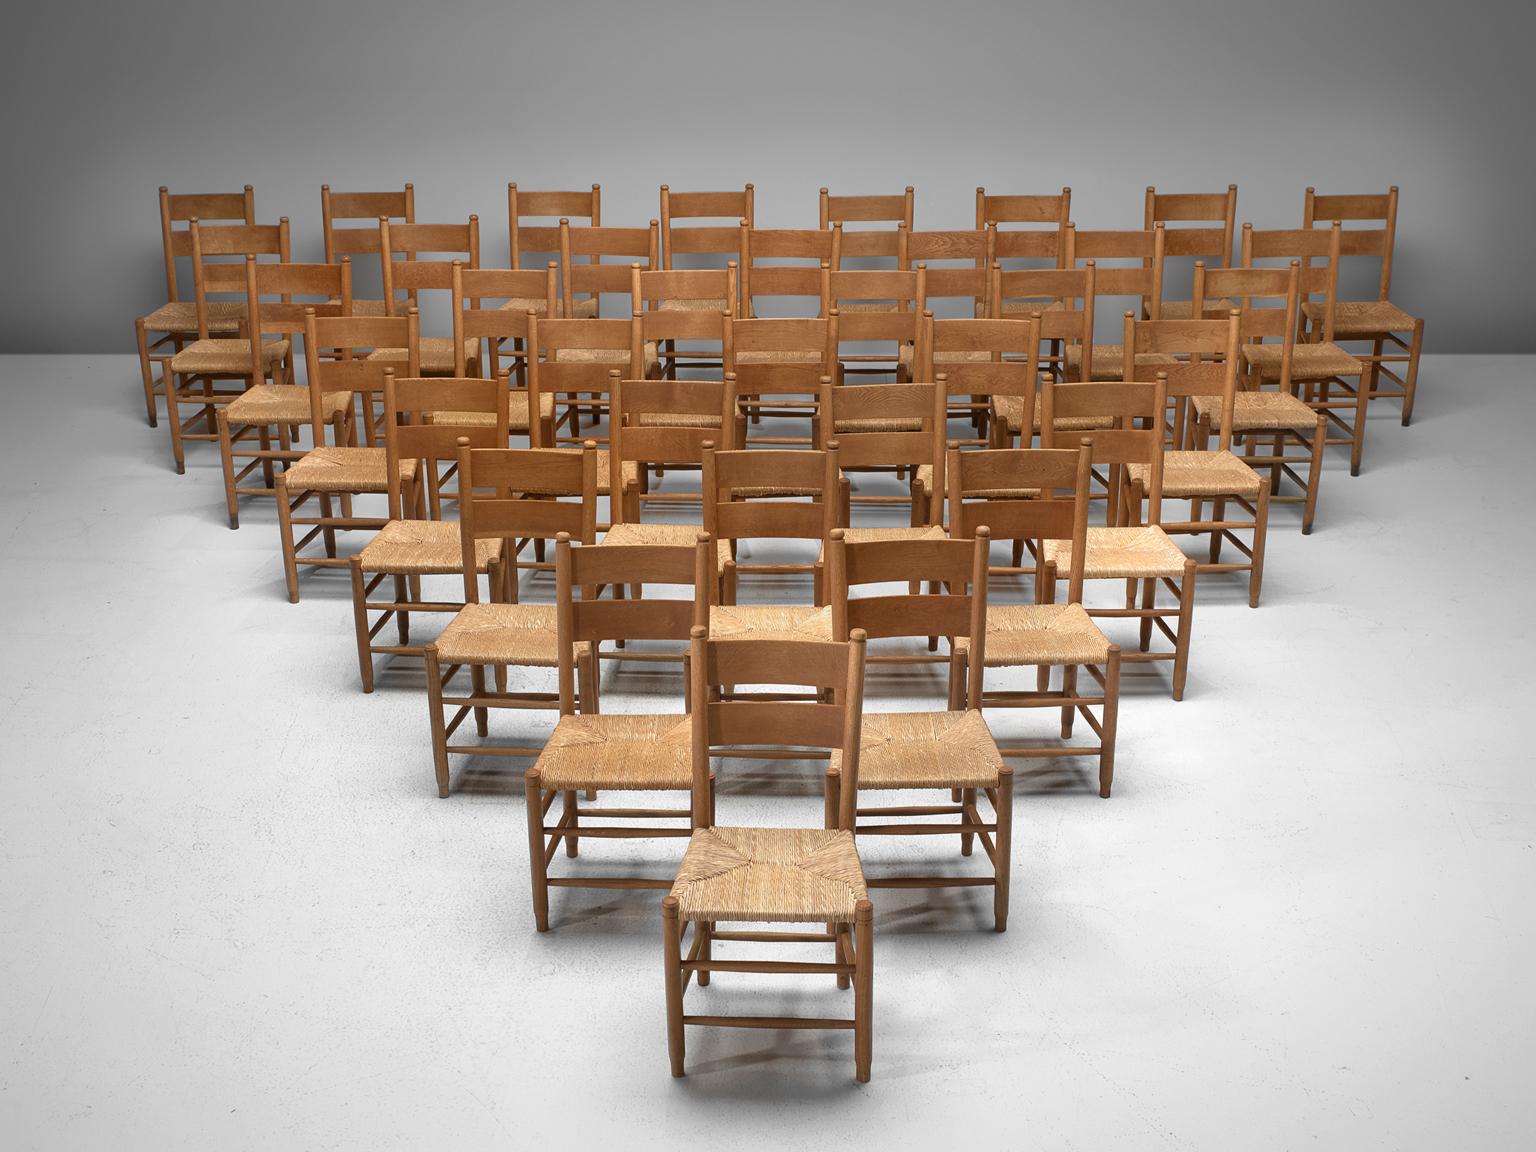 Large set of 36 church chairs, oak and rope, Denmark, 1960s.

Large set of Danish church chairs made in oak and with a rope woven seat. The chairs features subtle details, such as the double back rest and double slats below the seat. Please note